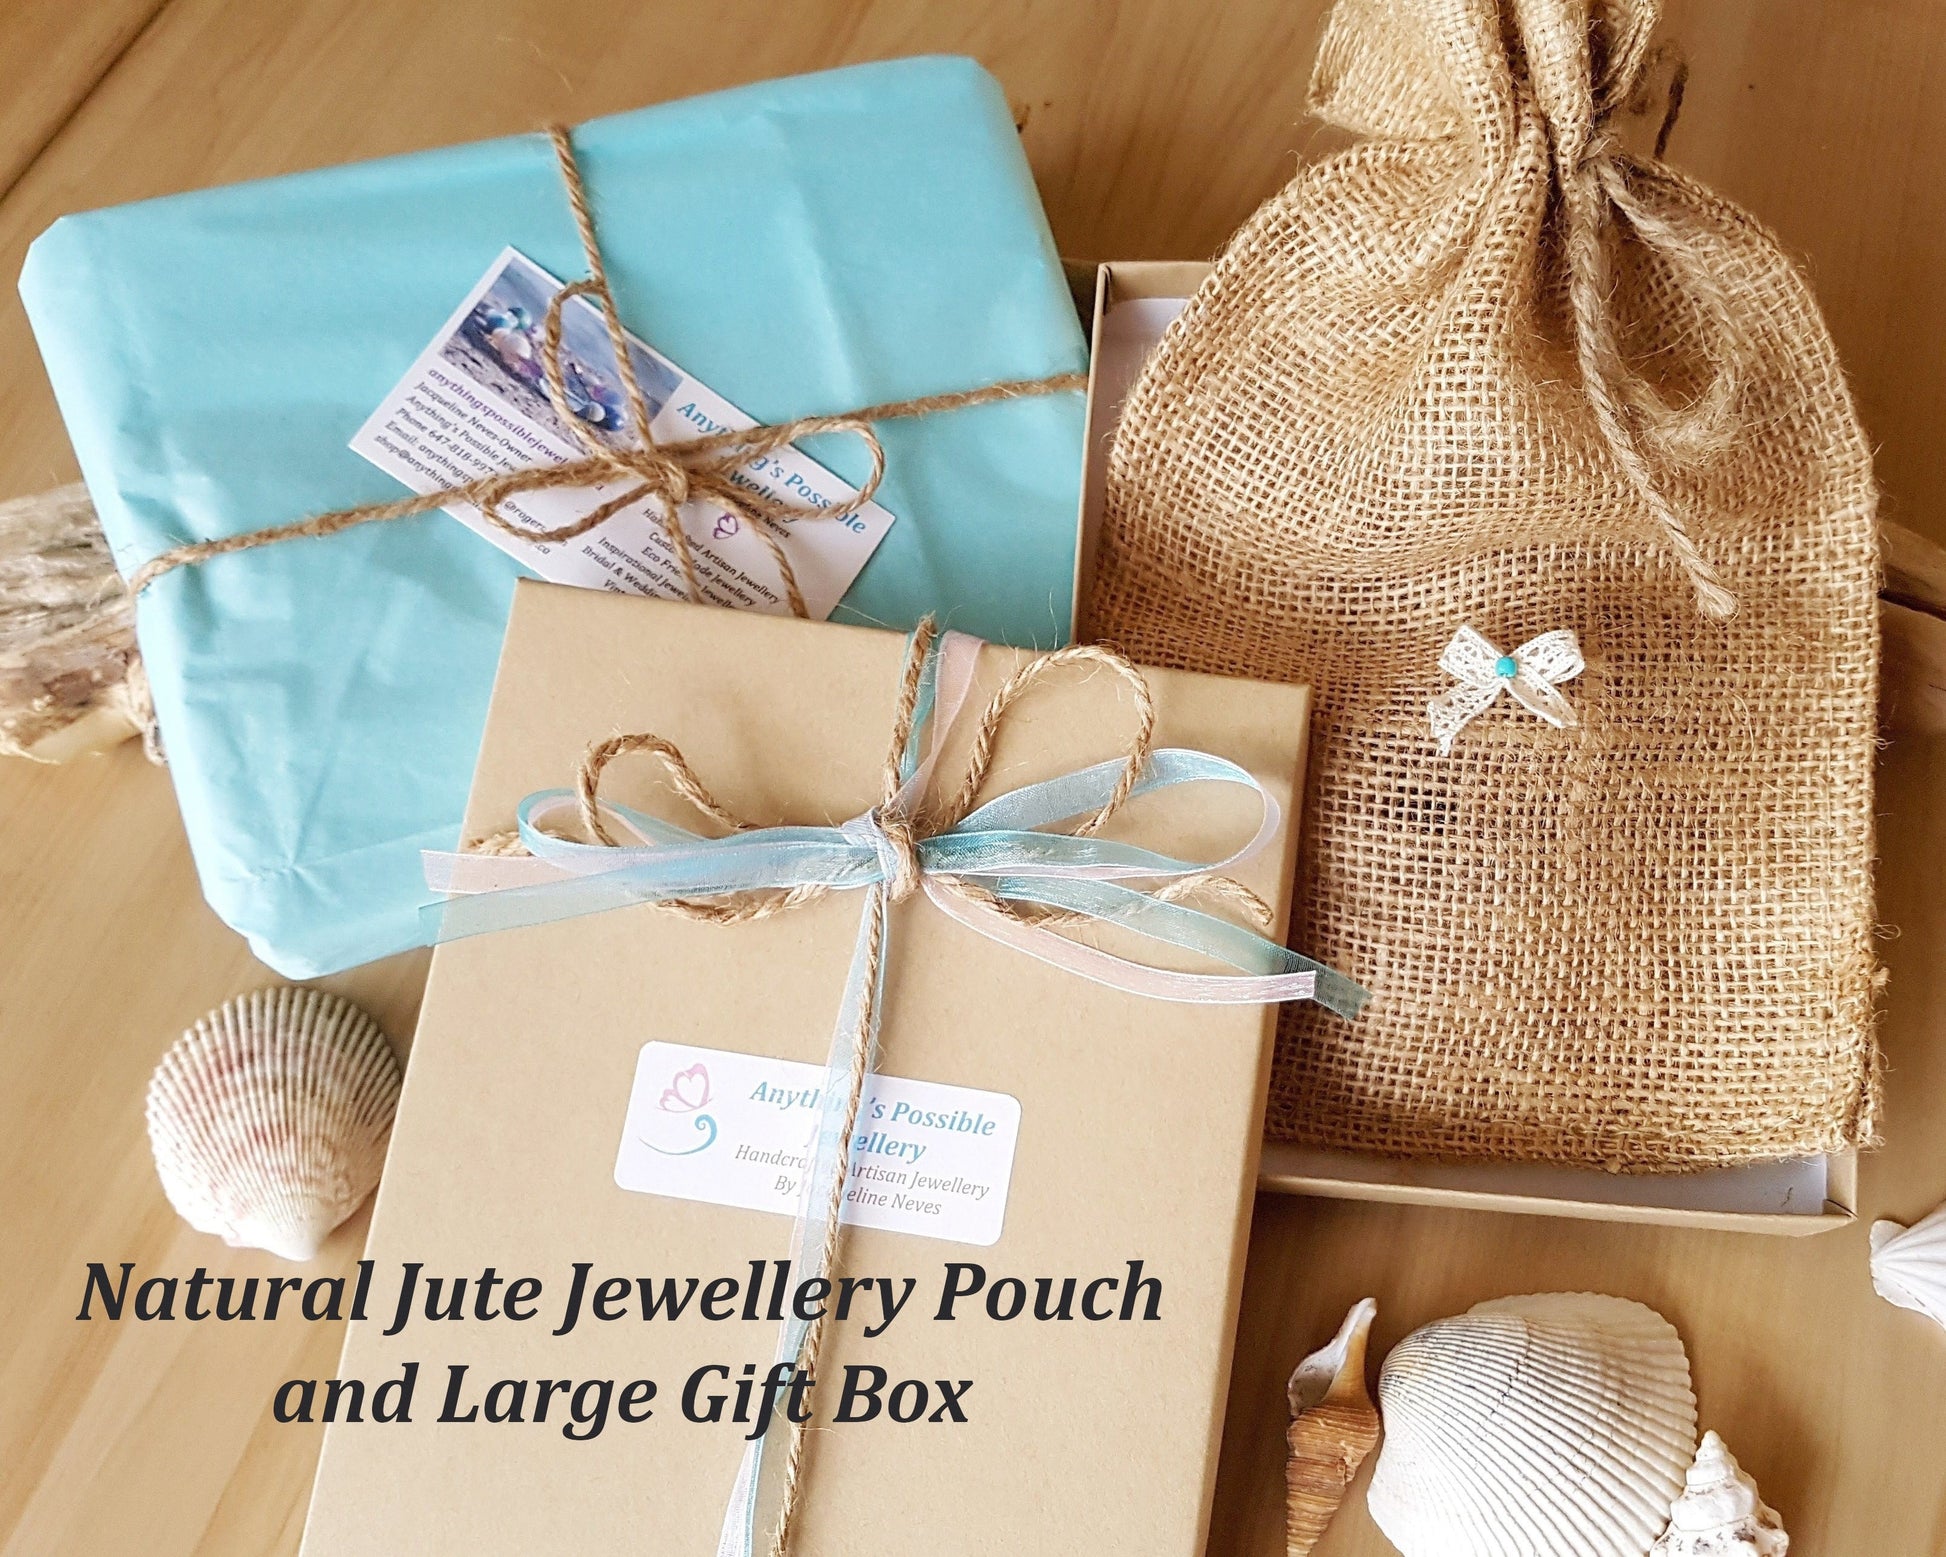 Eco Friendlier Recycled Paper Gift Box, Reusable Natural Jute Jewellery Pouch, Tissue Paper, Ribbon, and Twine